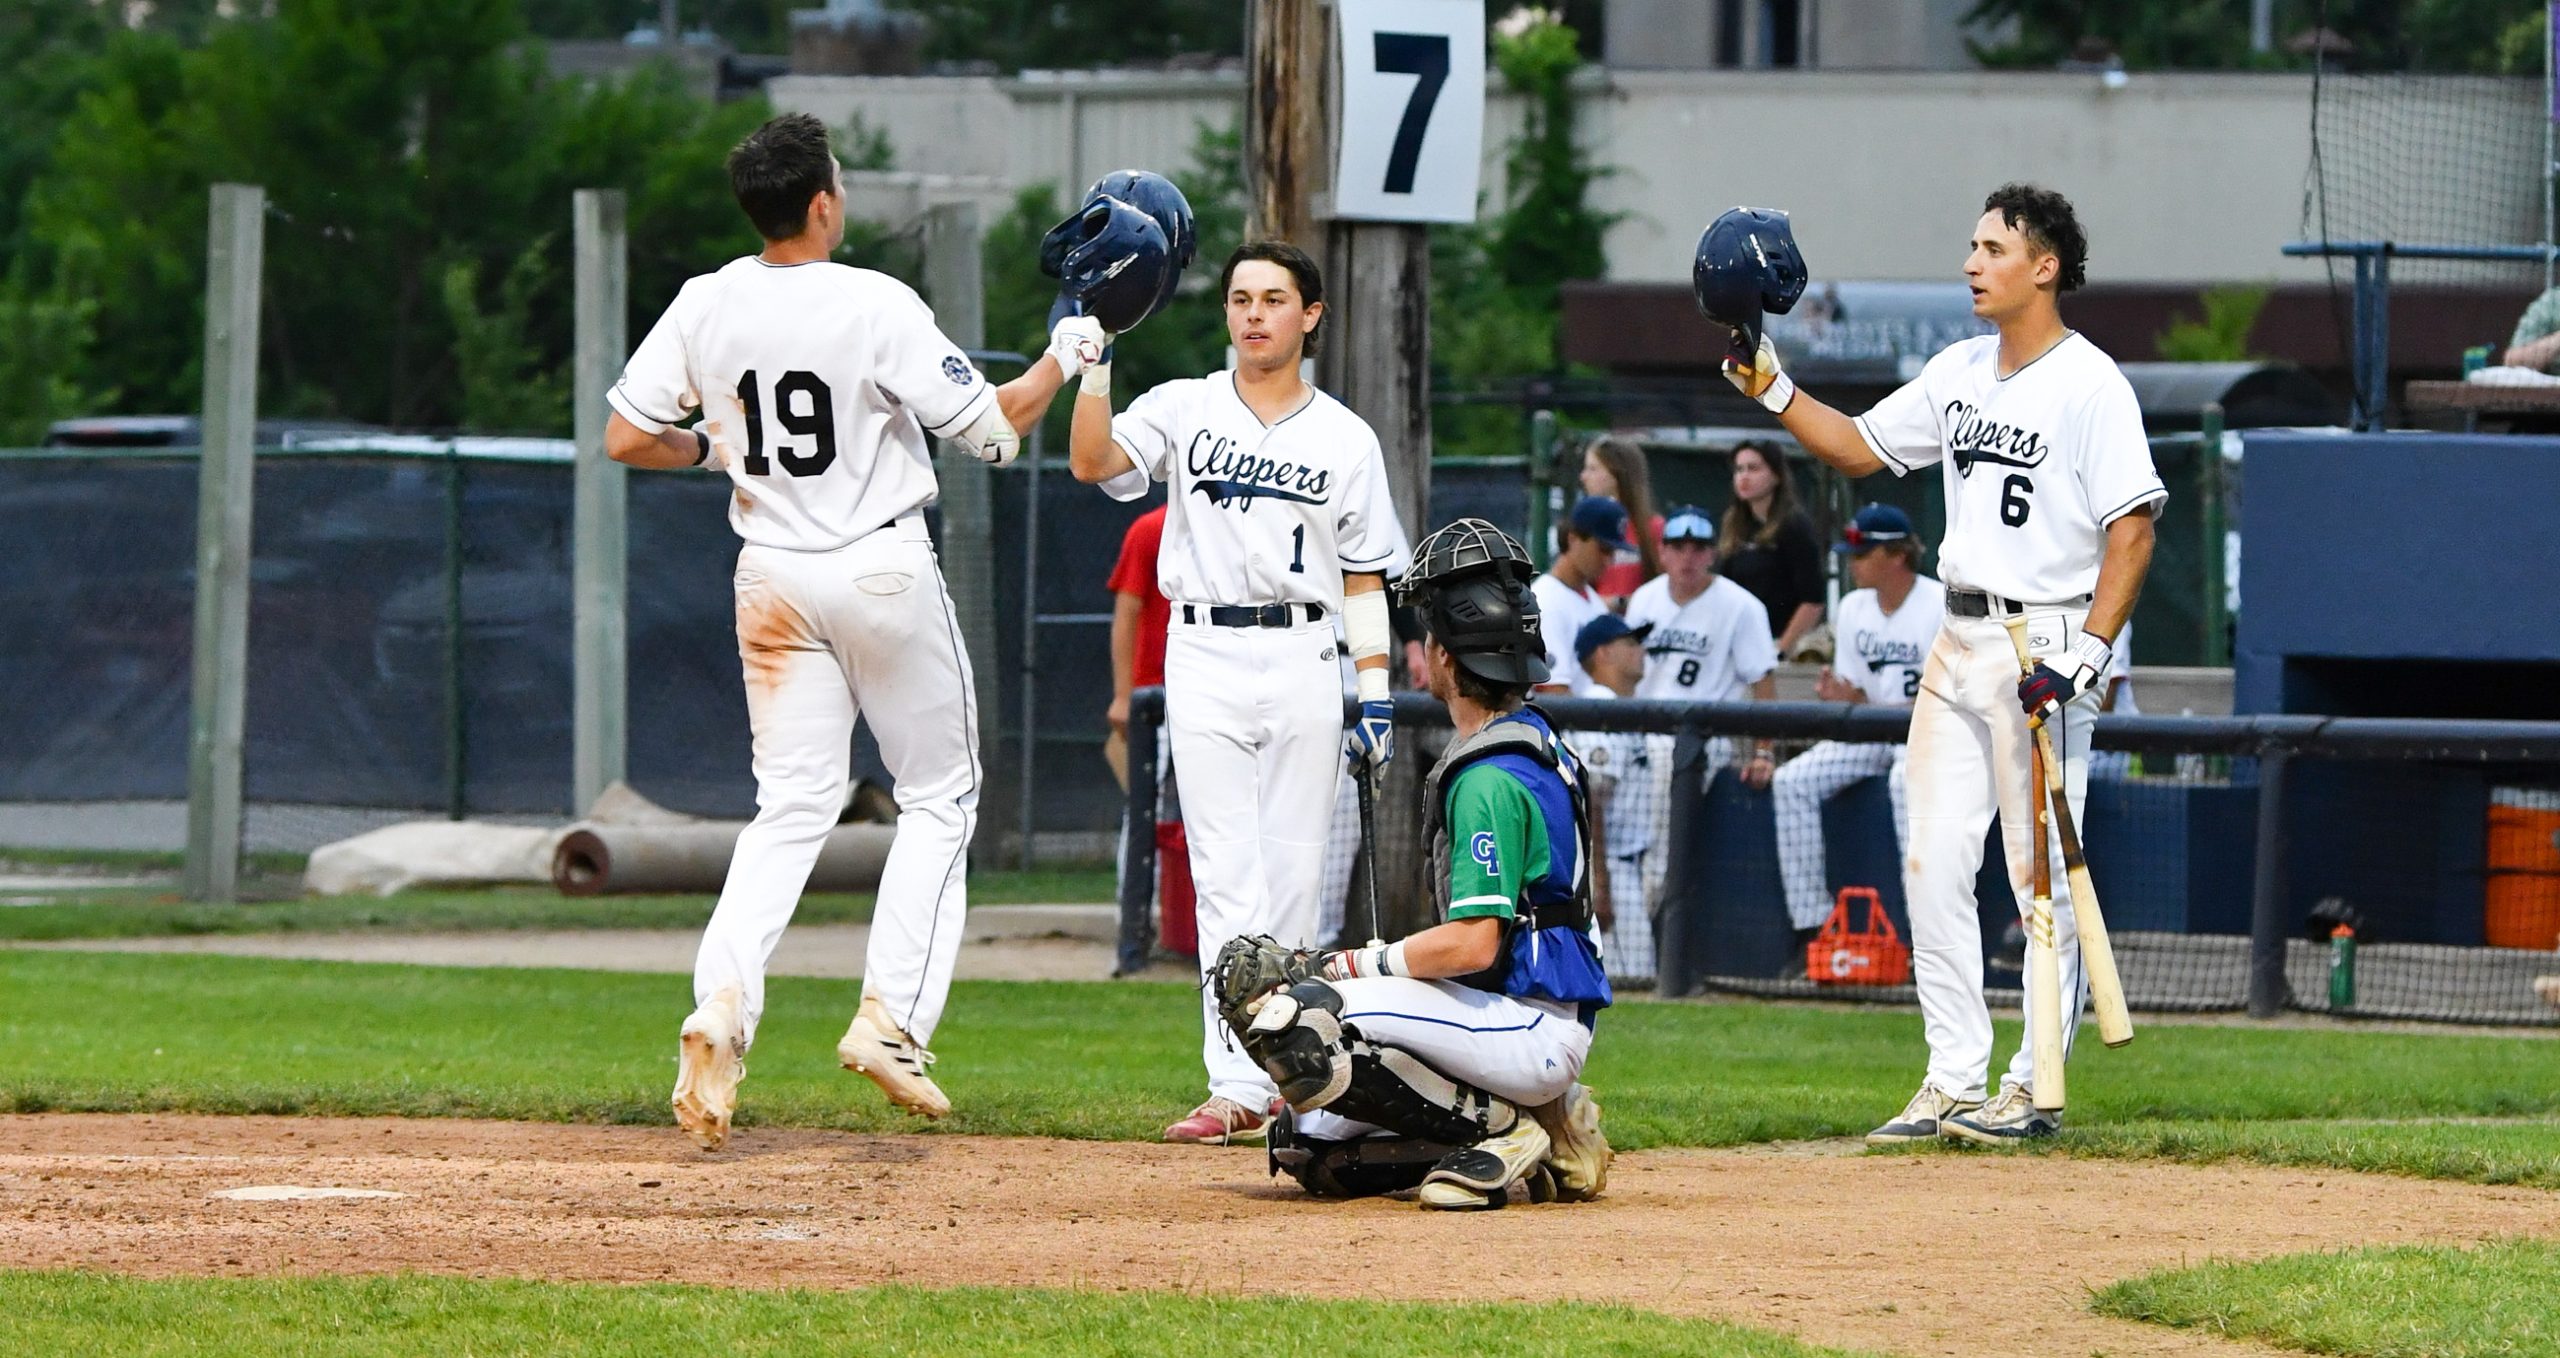 Muskegon Clippers ‘walk’ to victory over Grand Lake Mariners, 13-3